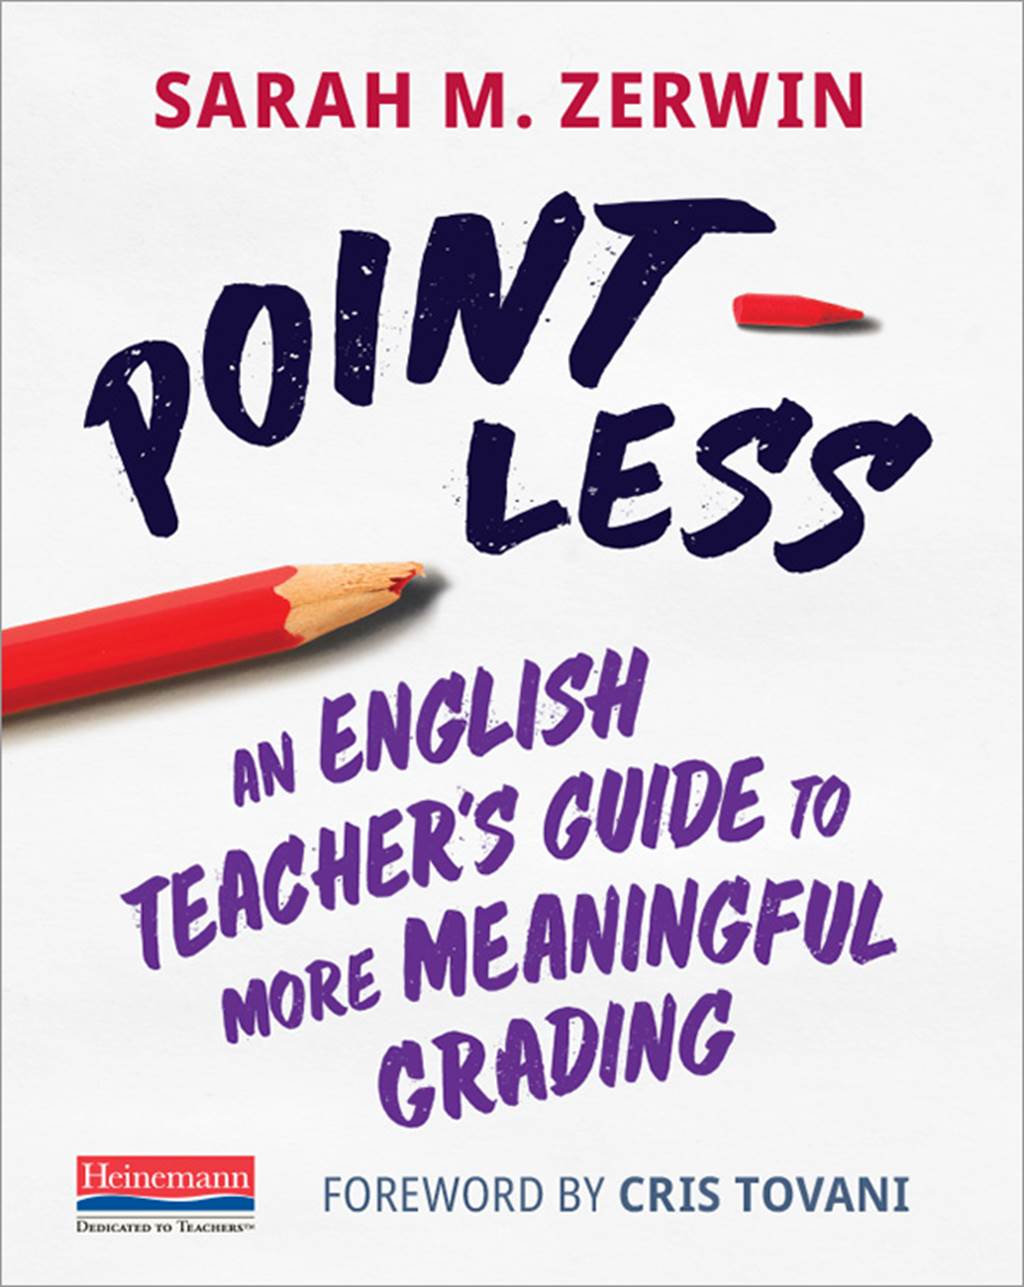 Point-Less: An English Teacher’s Guide to More Meaningful Grading - image